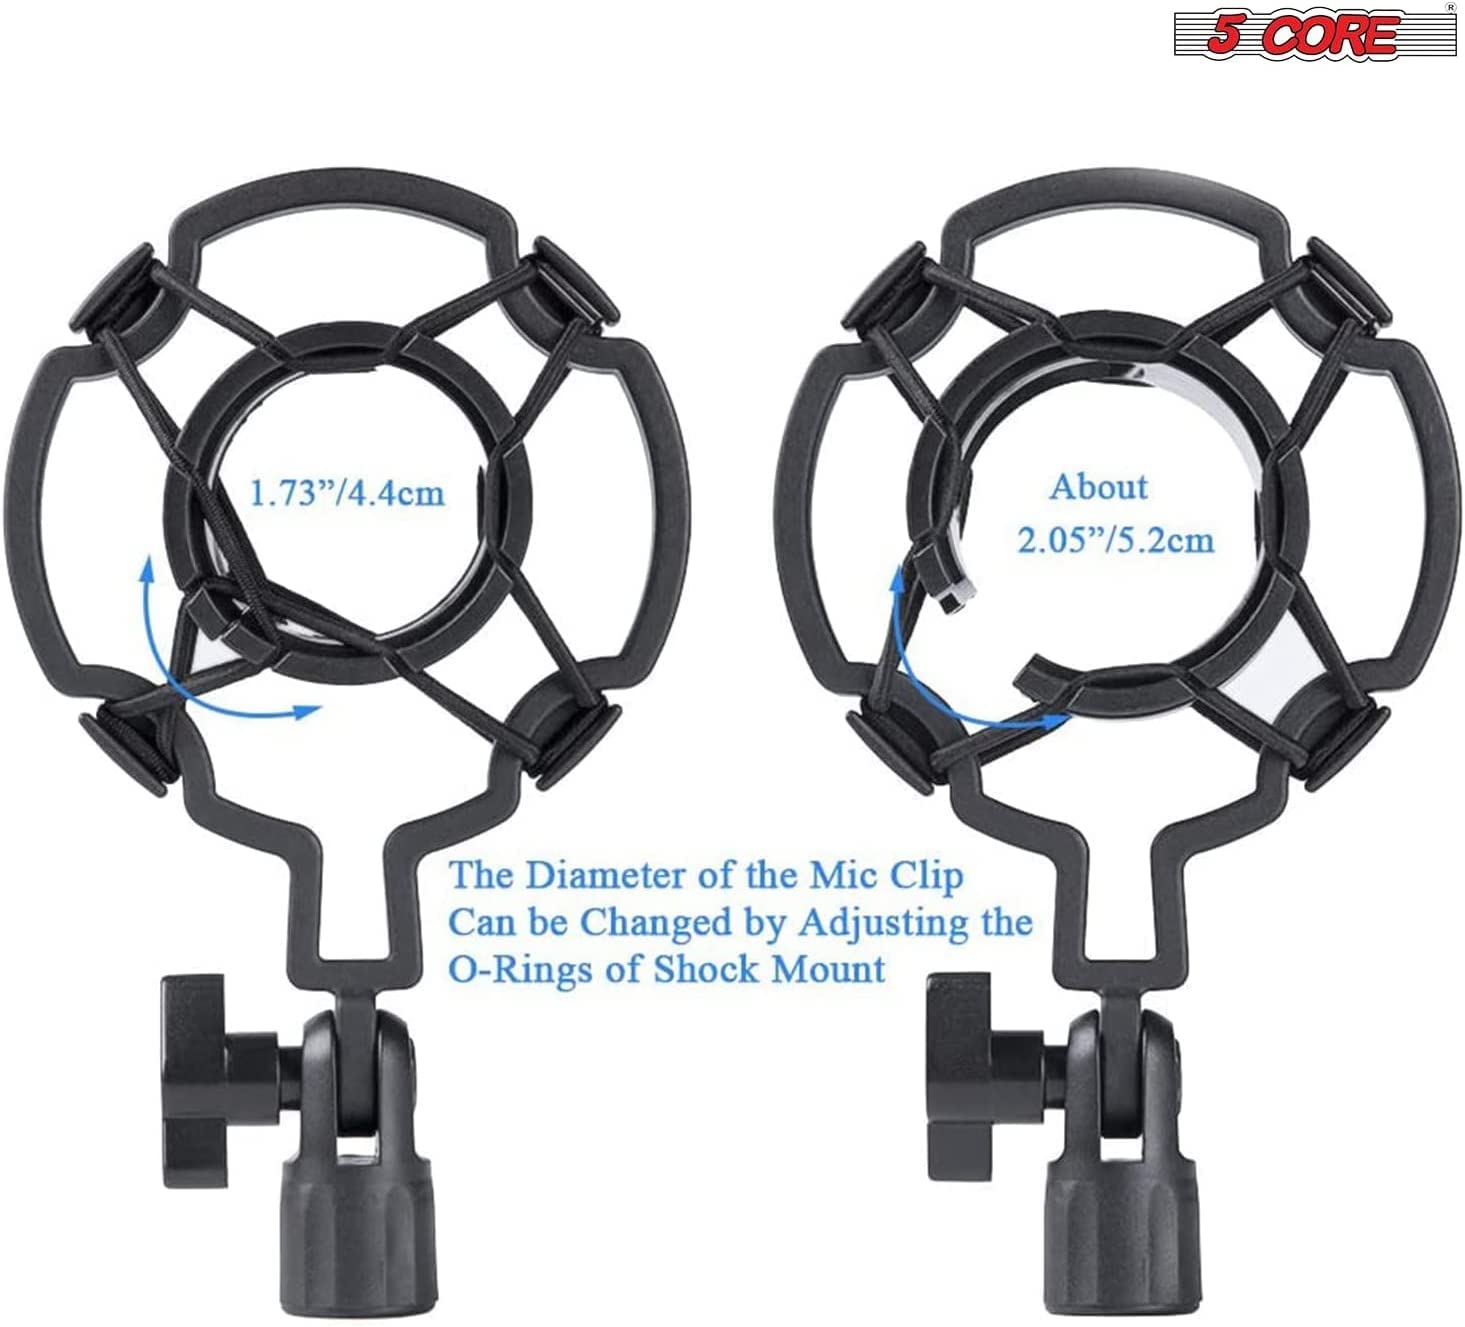 the diameter of the mic clip